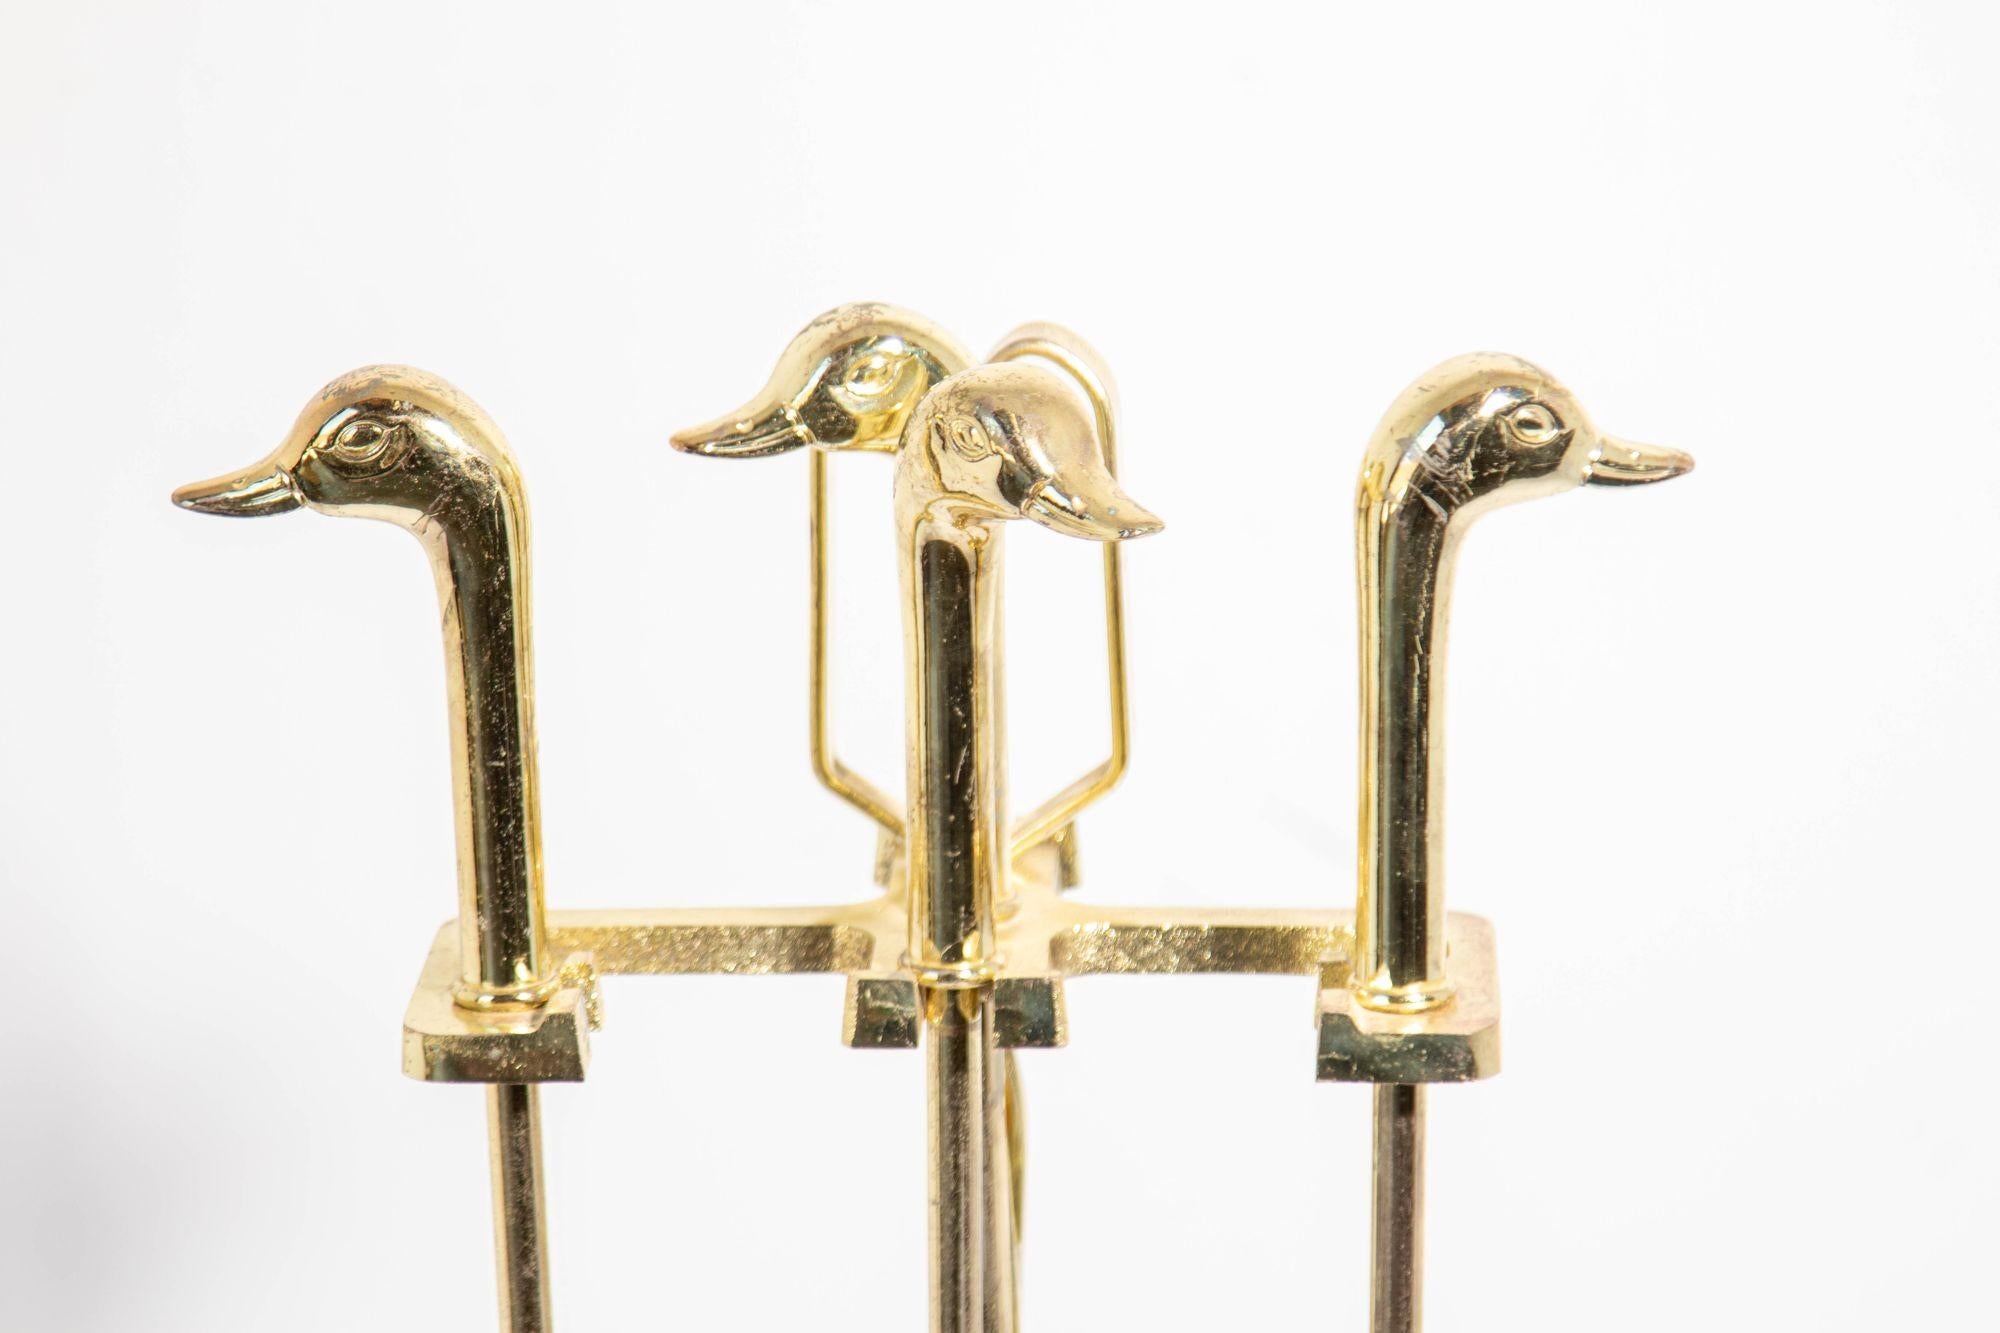 Vintage Fireplace tools in brass metal plated color with duck Mallard heads, circa 1980.
Vintage fireplace tools in brass lacquered with duck heads, French style.
Five-pieces, fireplace tool set features a brass lacquered metal frame and four metal